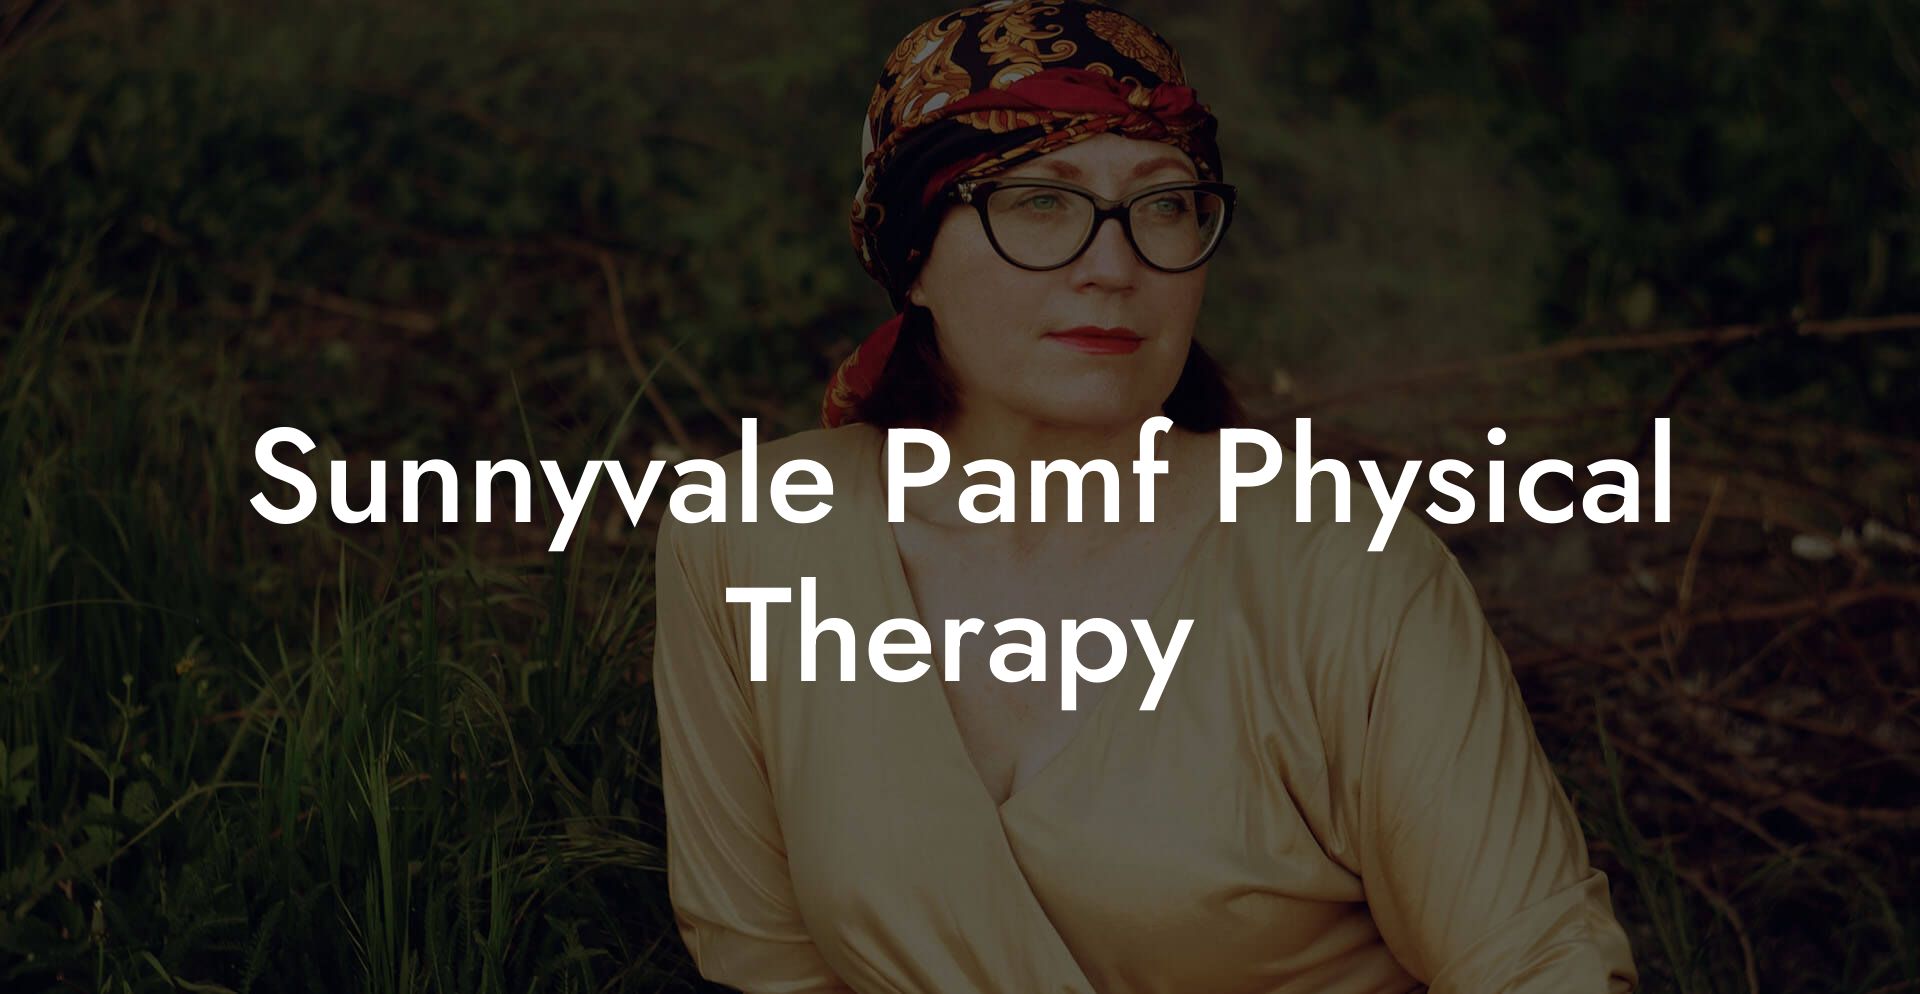 Sunnyvale Pamf Physical Therapy